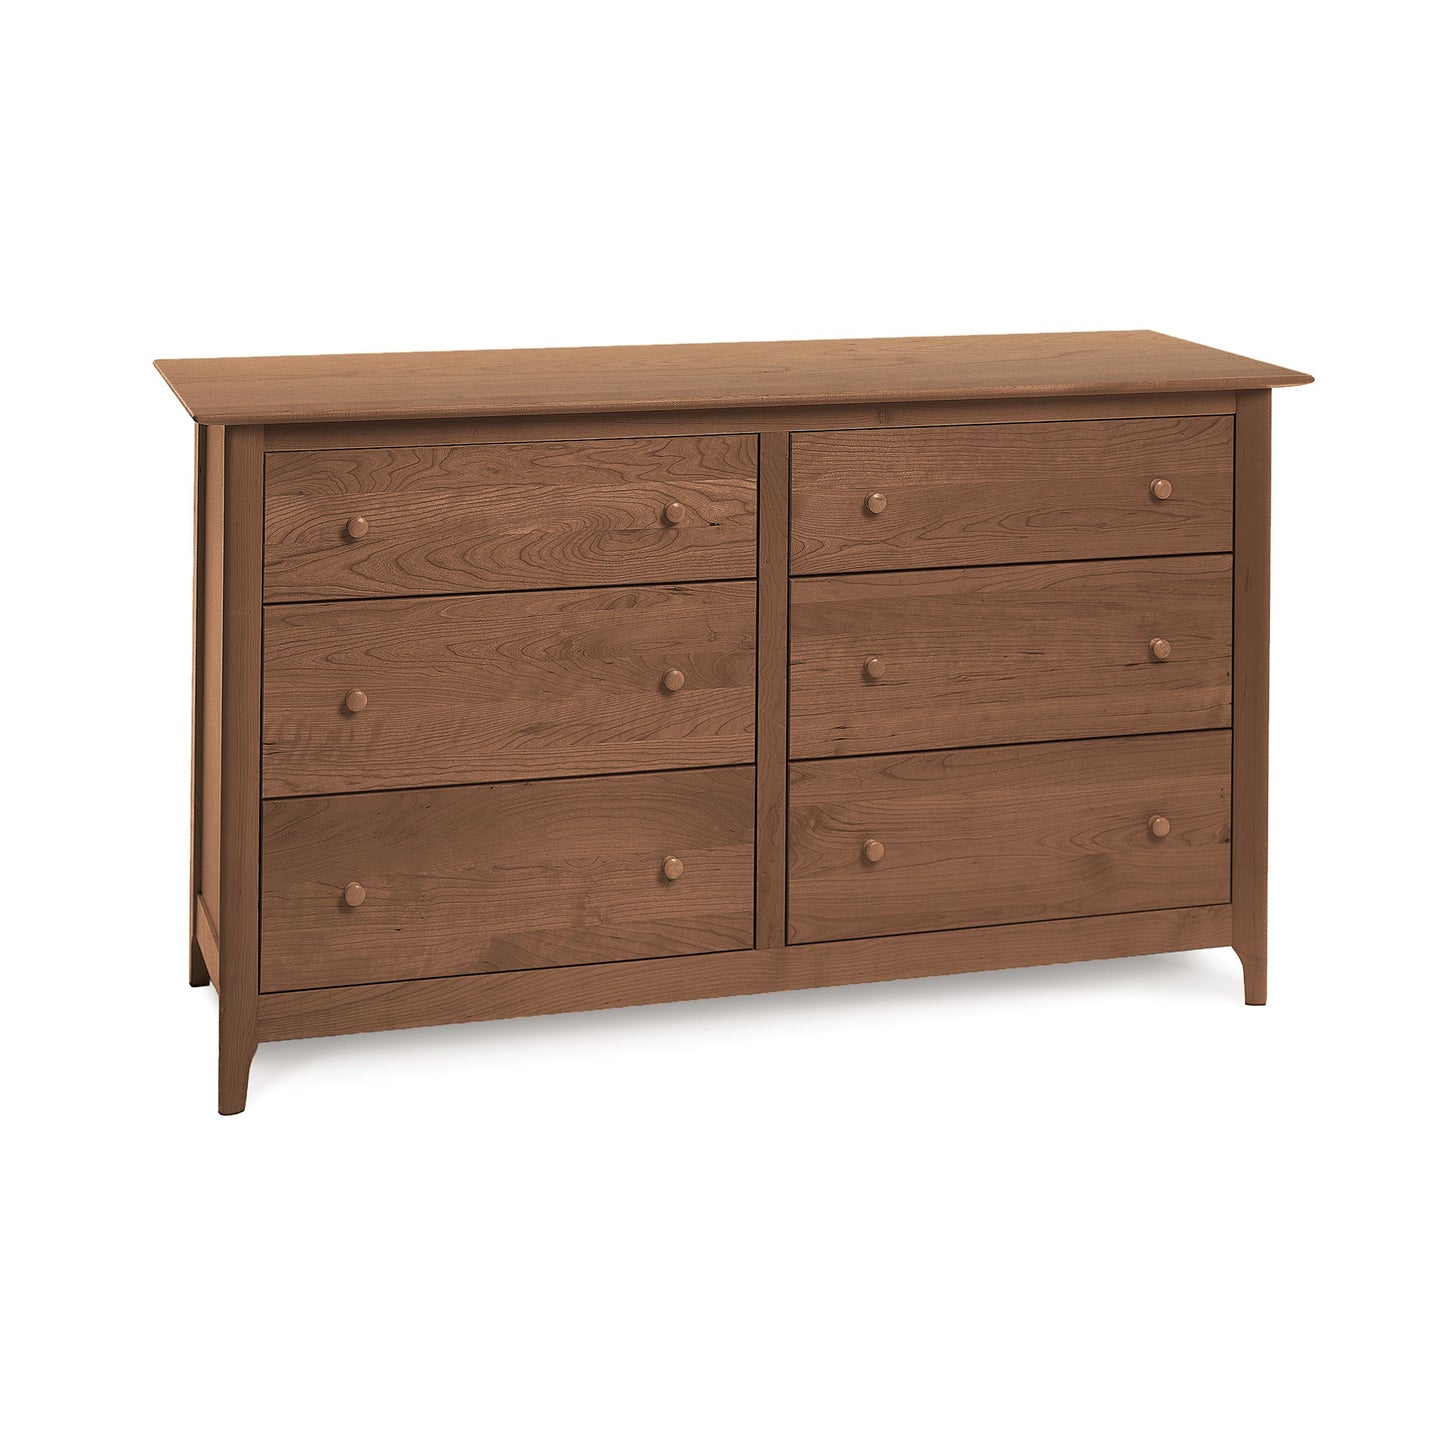 An eco-friendly wooden Sarah 6-Drawer Dresser from Copeland Furniture on a plain background.